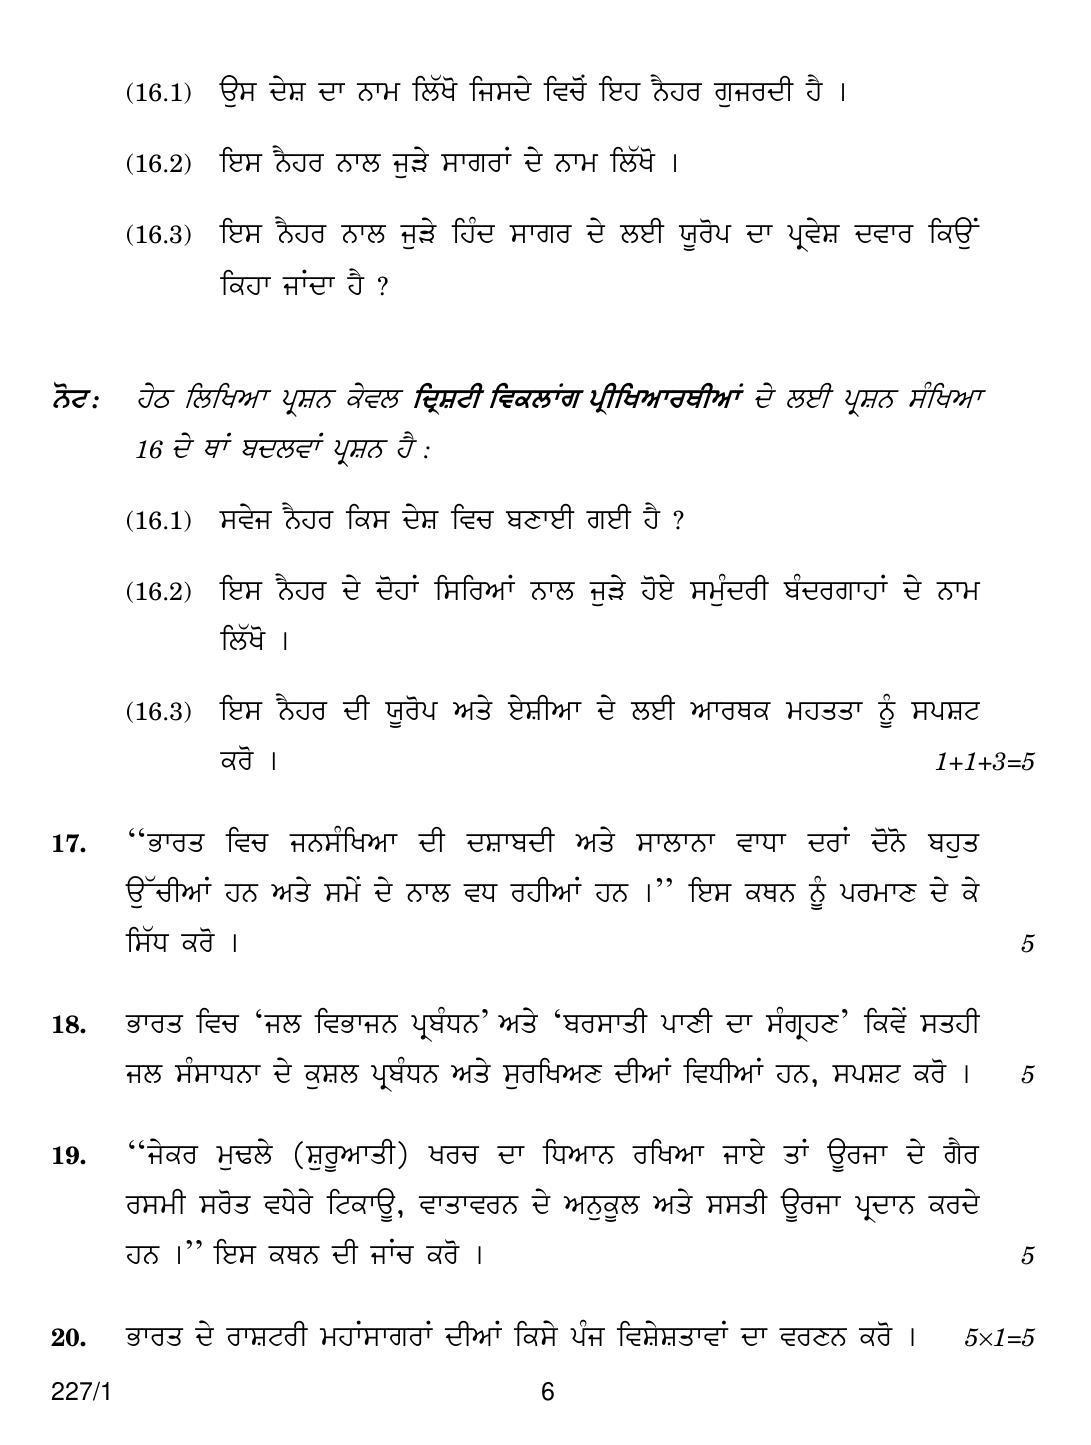 CBSE Class 12 227-1 GEOGRAPHY PUNJABI VERSION 2018 Question Paper - Page 6